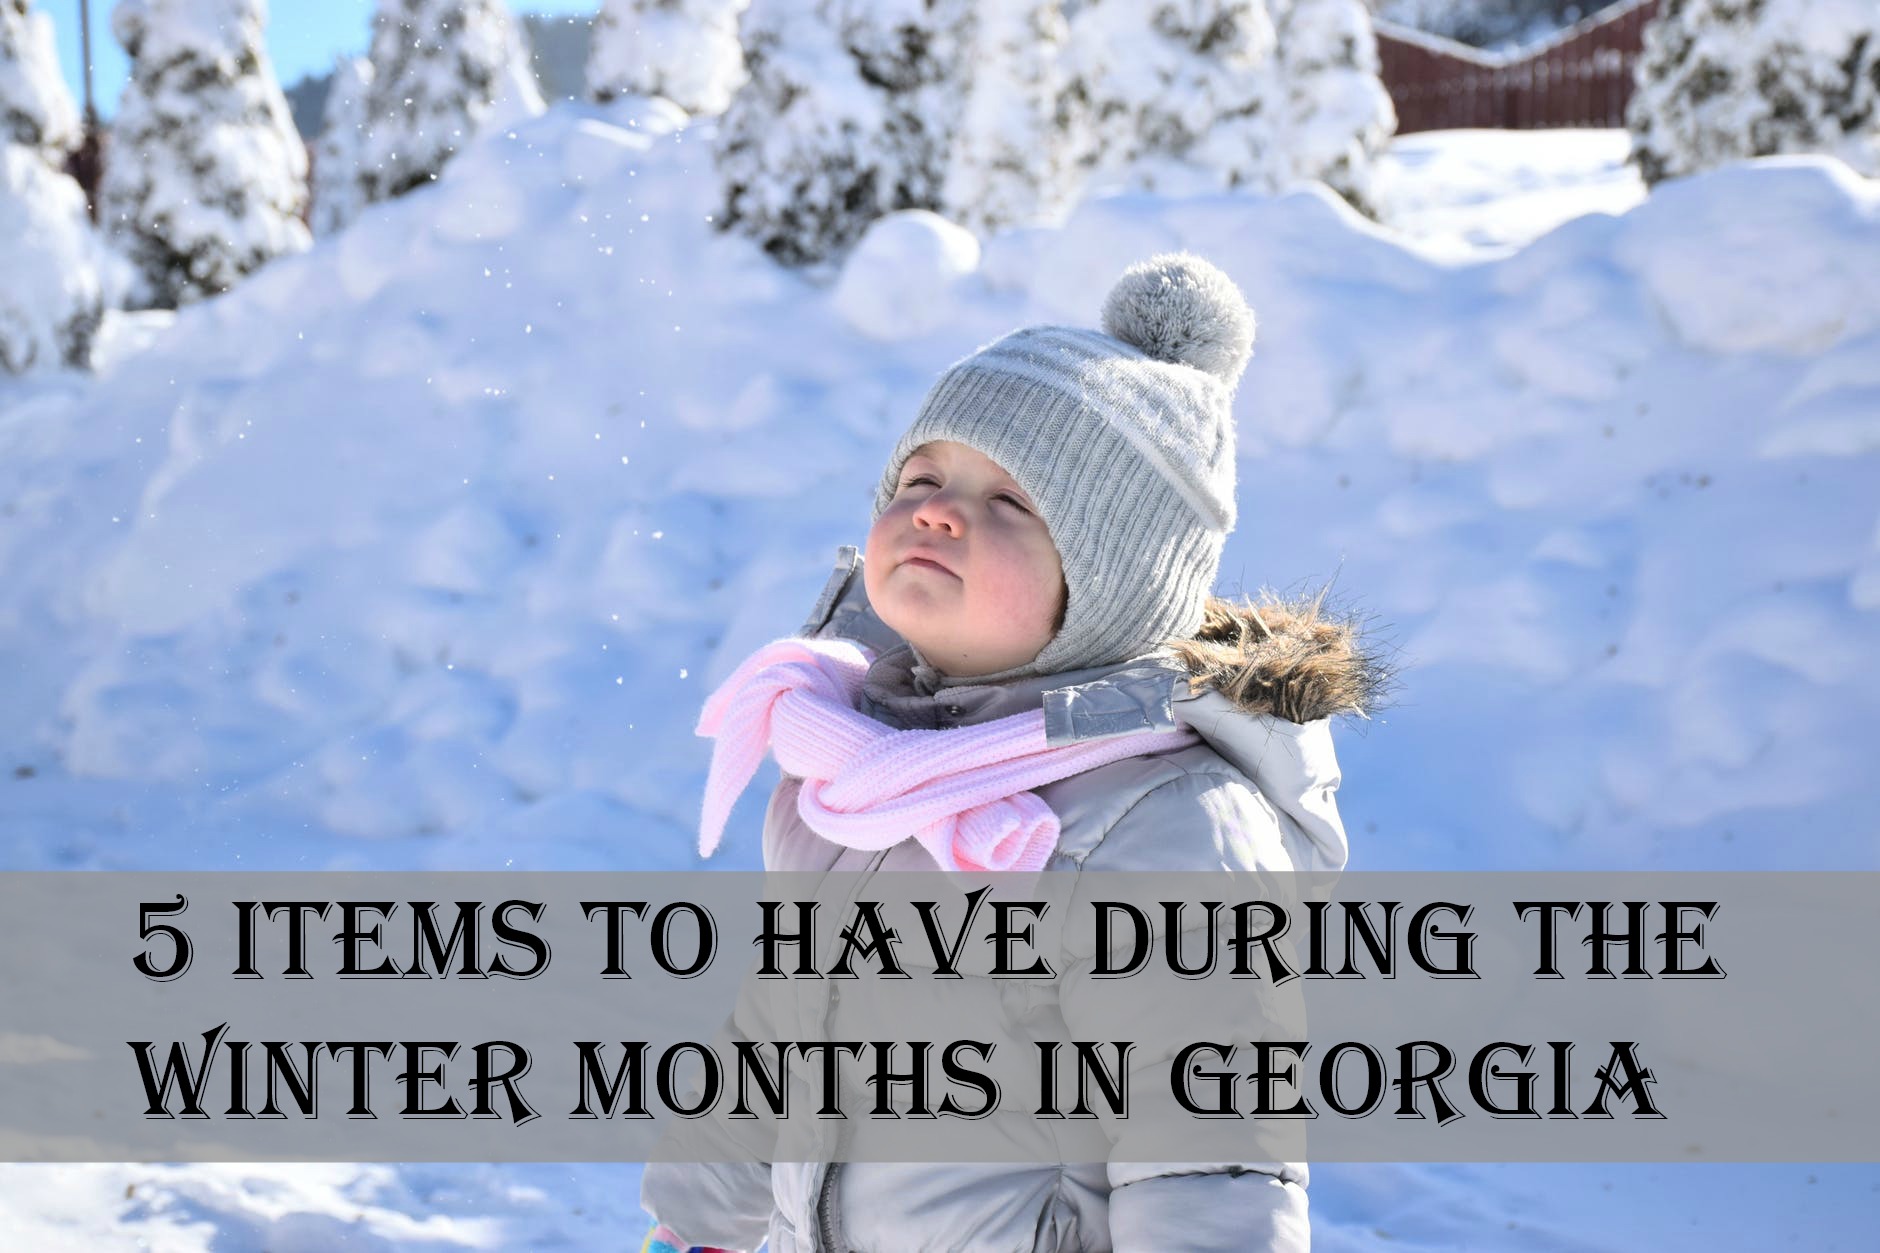 5 Items to Have During the Winter Months in Georgia